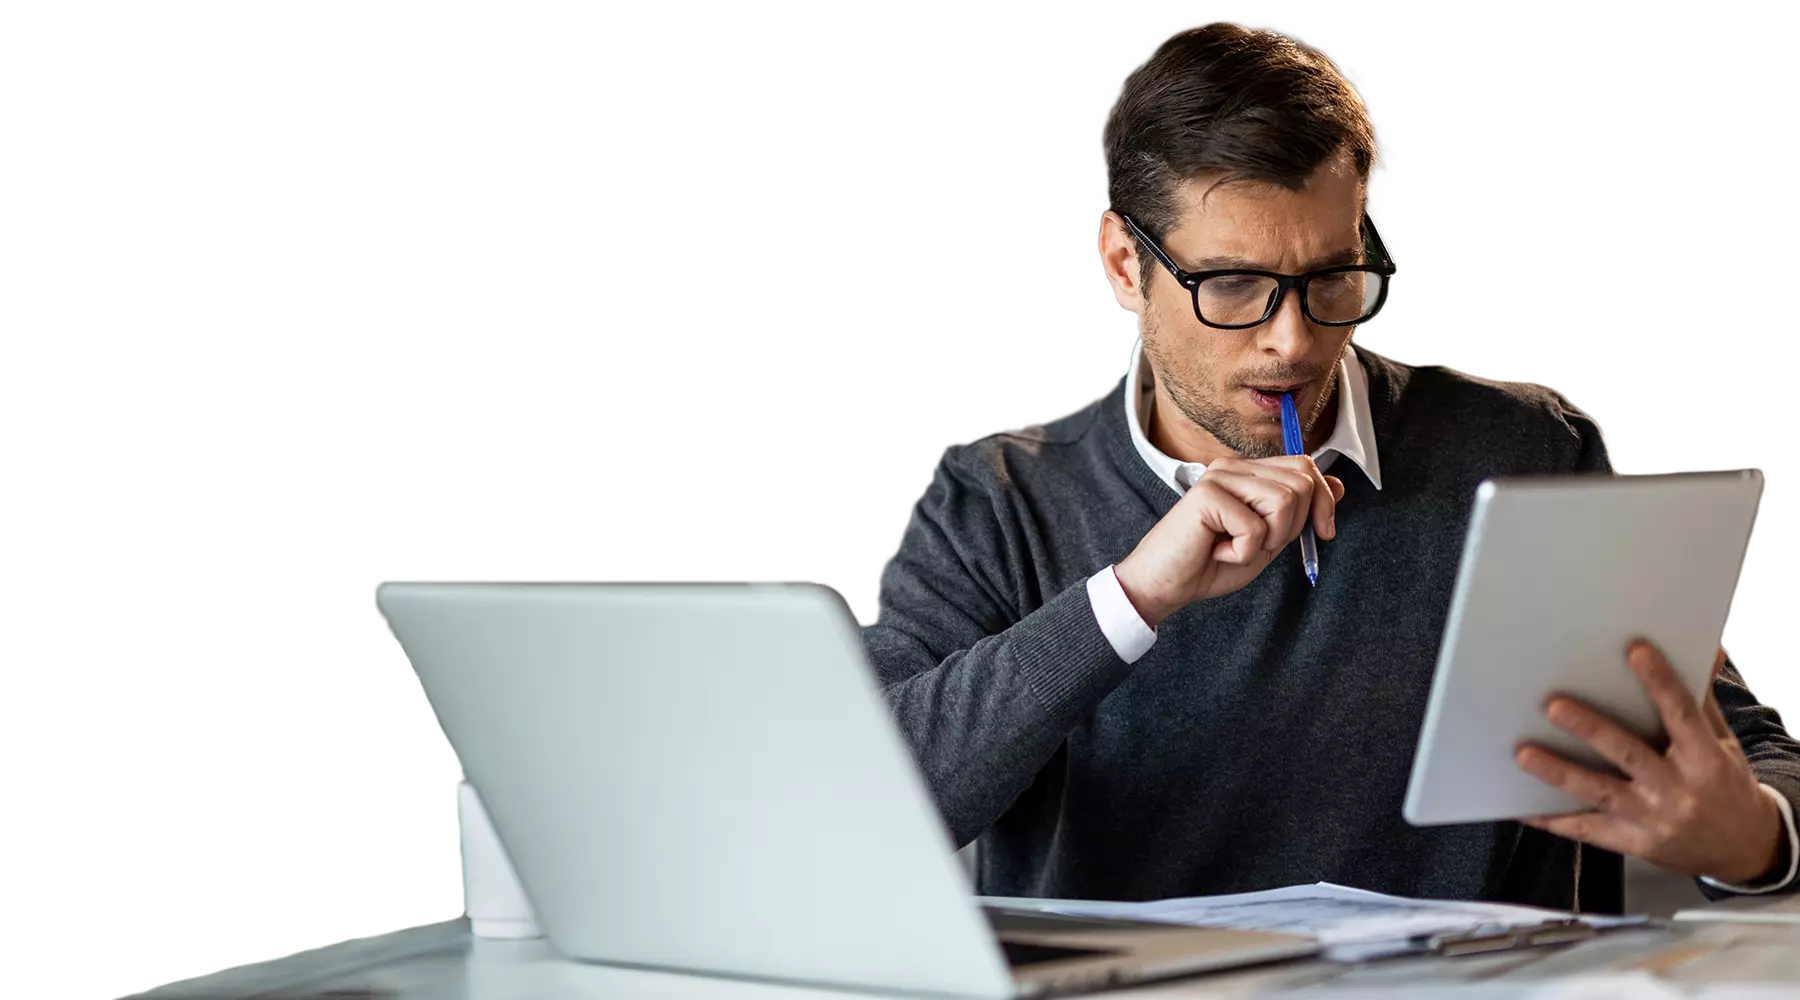 Man wearing glasses working at a computer